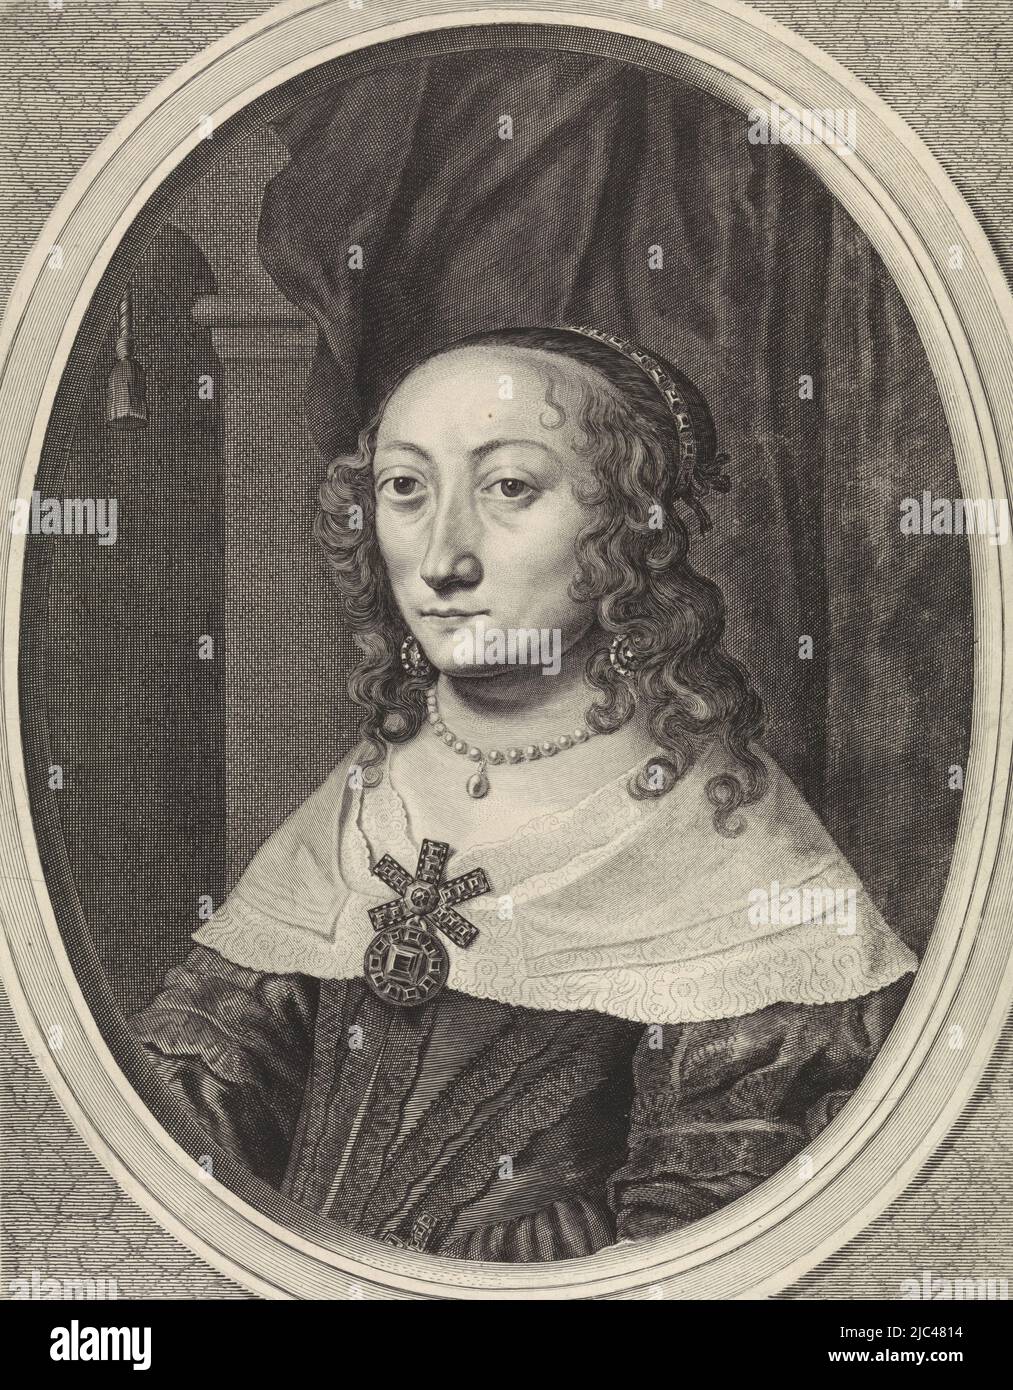 Portrait of Catherina Charlotta, palatine countess of Palatinate-Neuburg, wife of Wolfgang William of Palatinate-Neuburg. Around her neck a pearl necklace with a pendant and on her chest a jeweled pin., Portrait of Catherina Charlotta, palatine countess of Palatinate-Neuburg, print maker: Theodor Matham, after: Johannes Spilberg (II), c. 1635 - 1653, paper, engraving, h 414 mm × w 292 mm Stock Photo